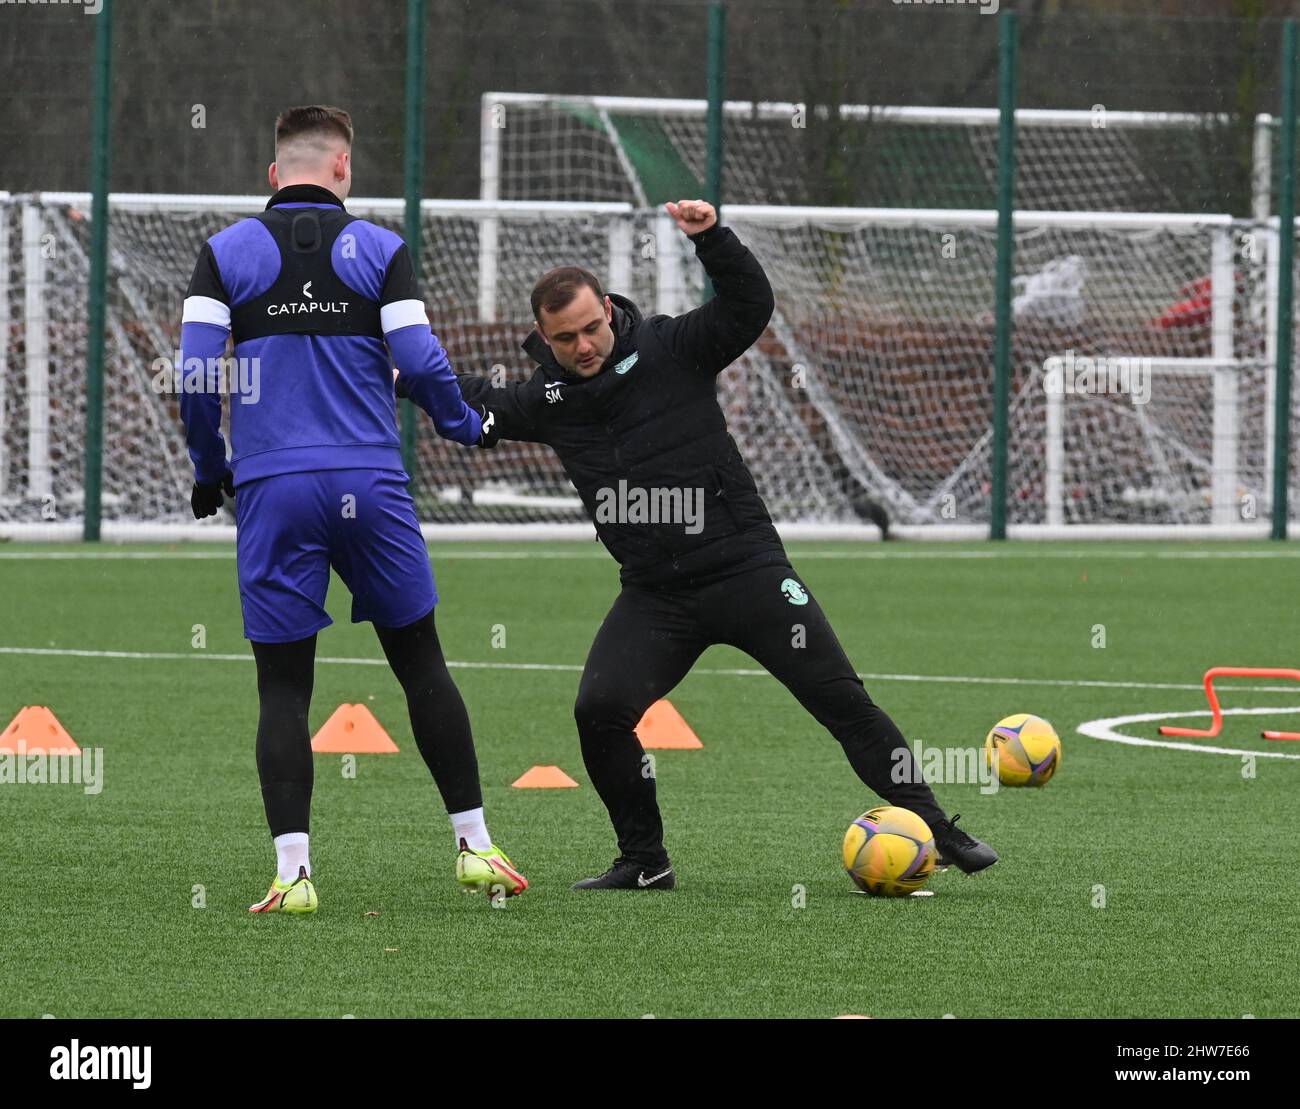 East Mains.Ormiston.Tranent.East Lothian.Scotland.UK.4th March 22 Hibs' Manager, Shaun Maloney & James Scott, training session for Cinch Premiership match with St Johnstone Credit: eric mccowat/Alamy Live News Stock Photo